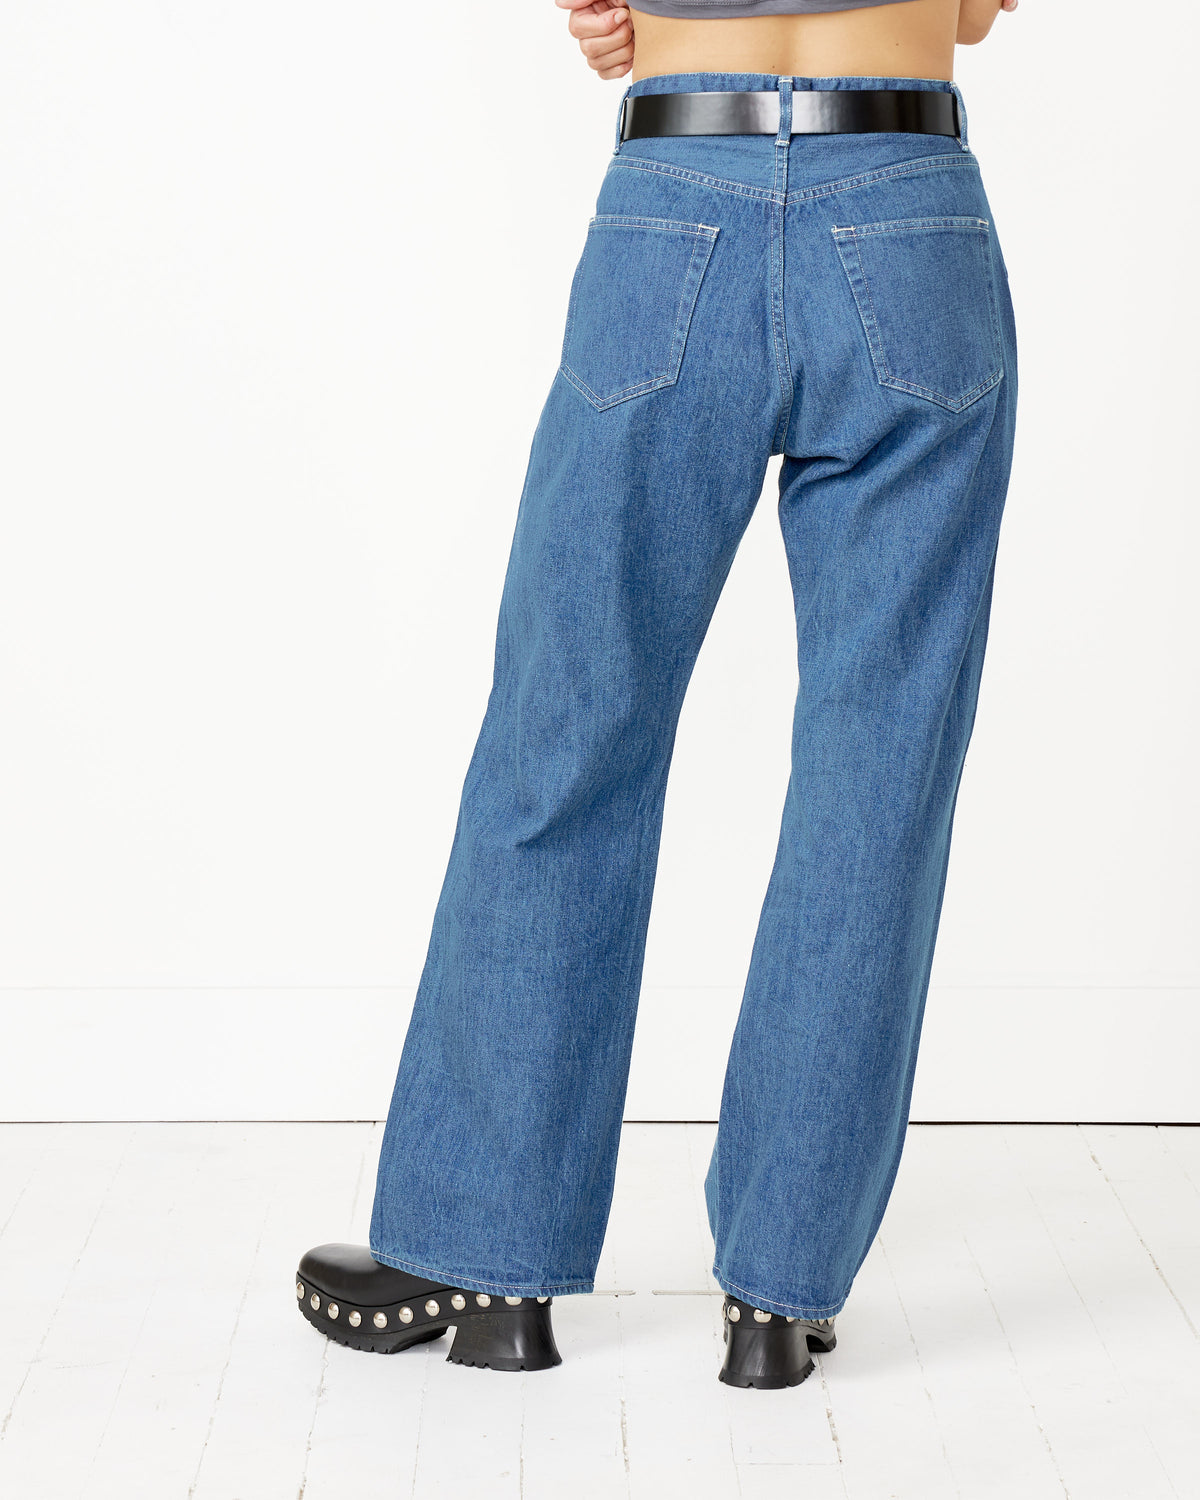 Shop for your entire family at Selvedge Light Denim Pants Auralee